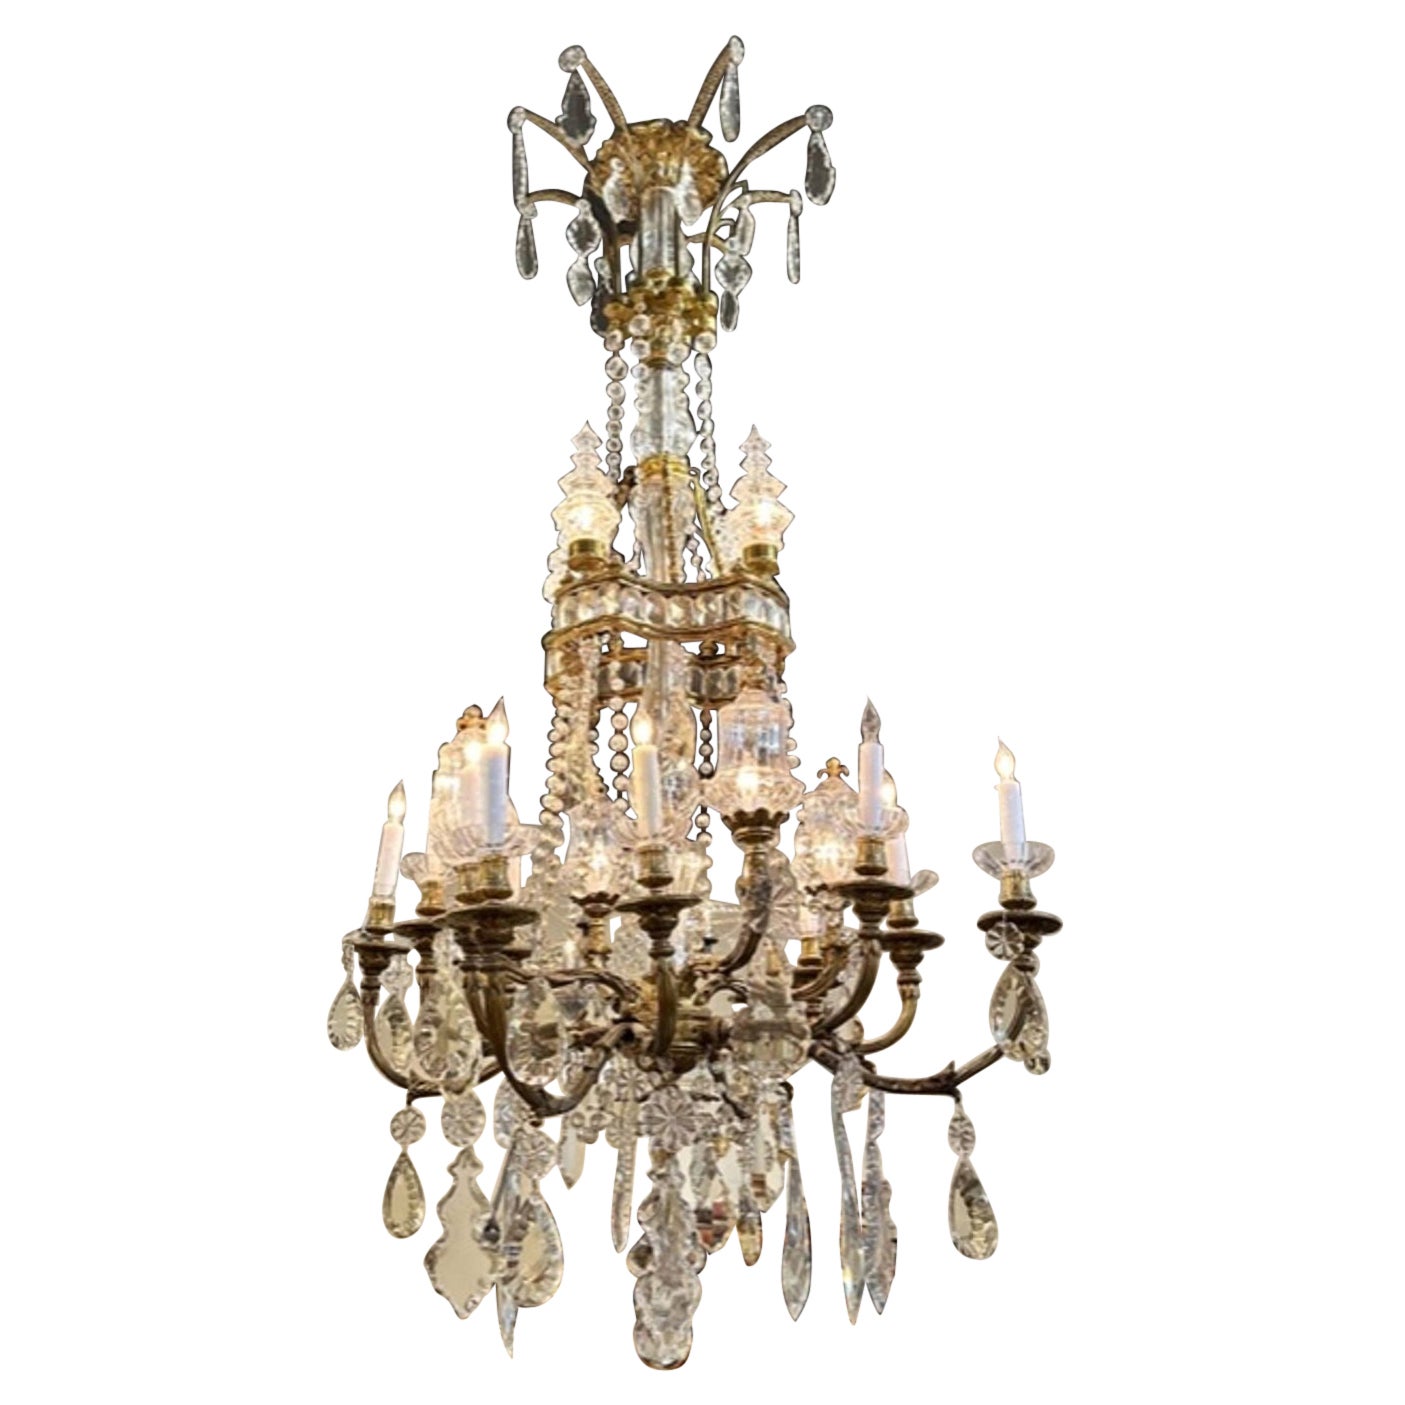 19th Century Large Scale English Gilt Bronze and Crystal Chandelier